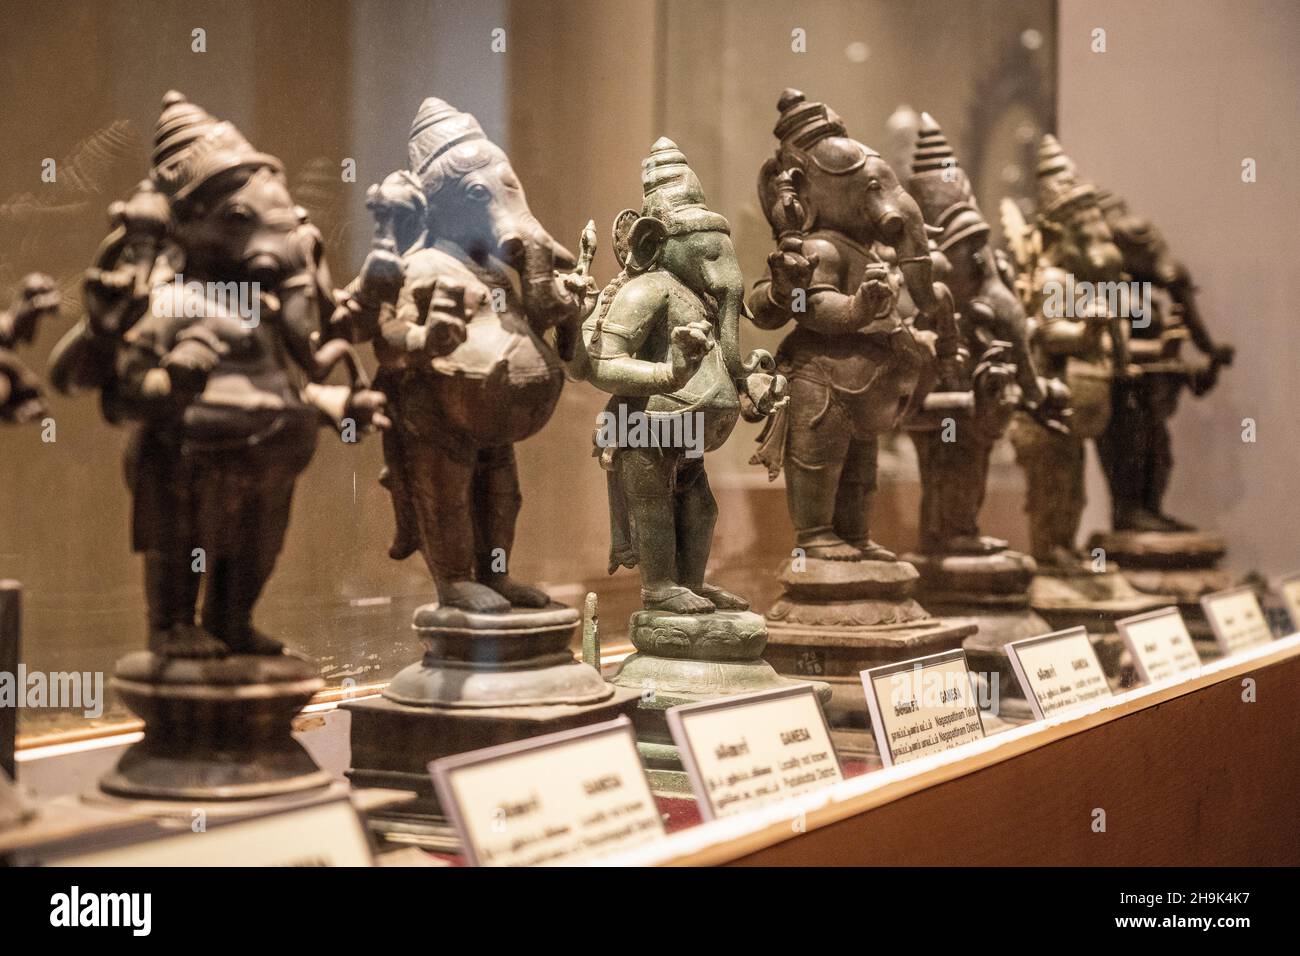 Bronze statues of Ganesh in a museum in Chenai in Tamil Nadu. From a series of travel photos in South India. Photo date: Monday, January 6, 2020. Photo credit should read: Richard Gray/EMPICS Stock Photo